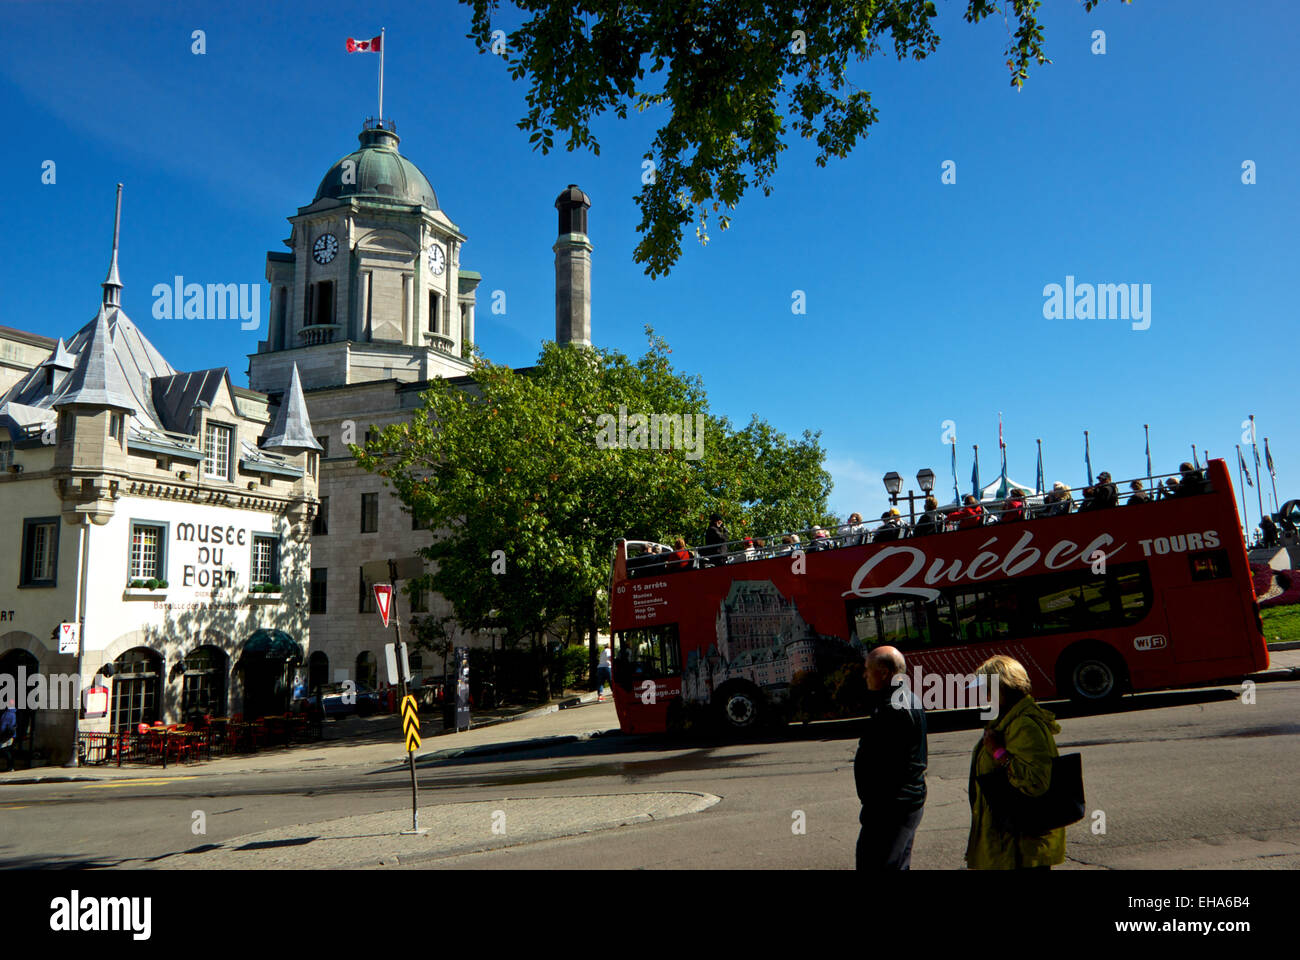 Red double decker tour bus Musee du Fort upper old Quebec City Stock Photo